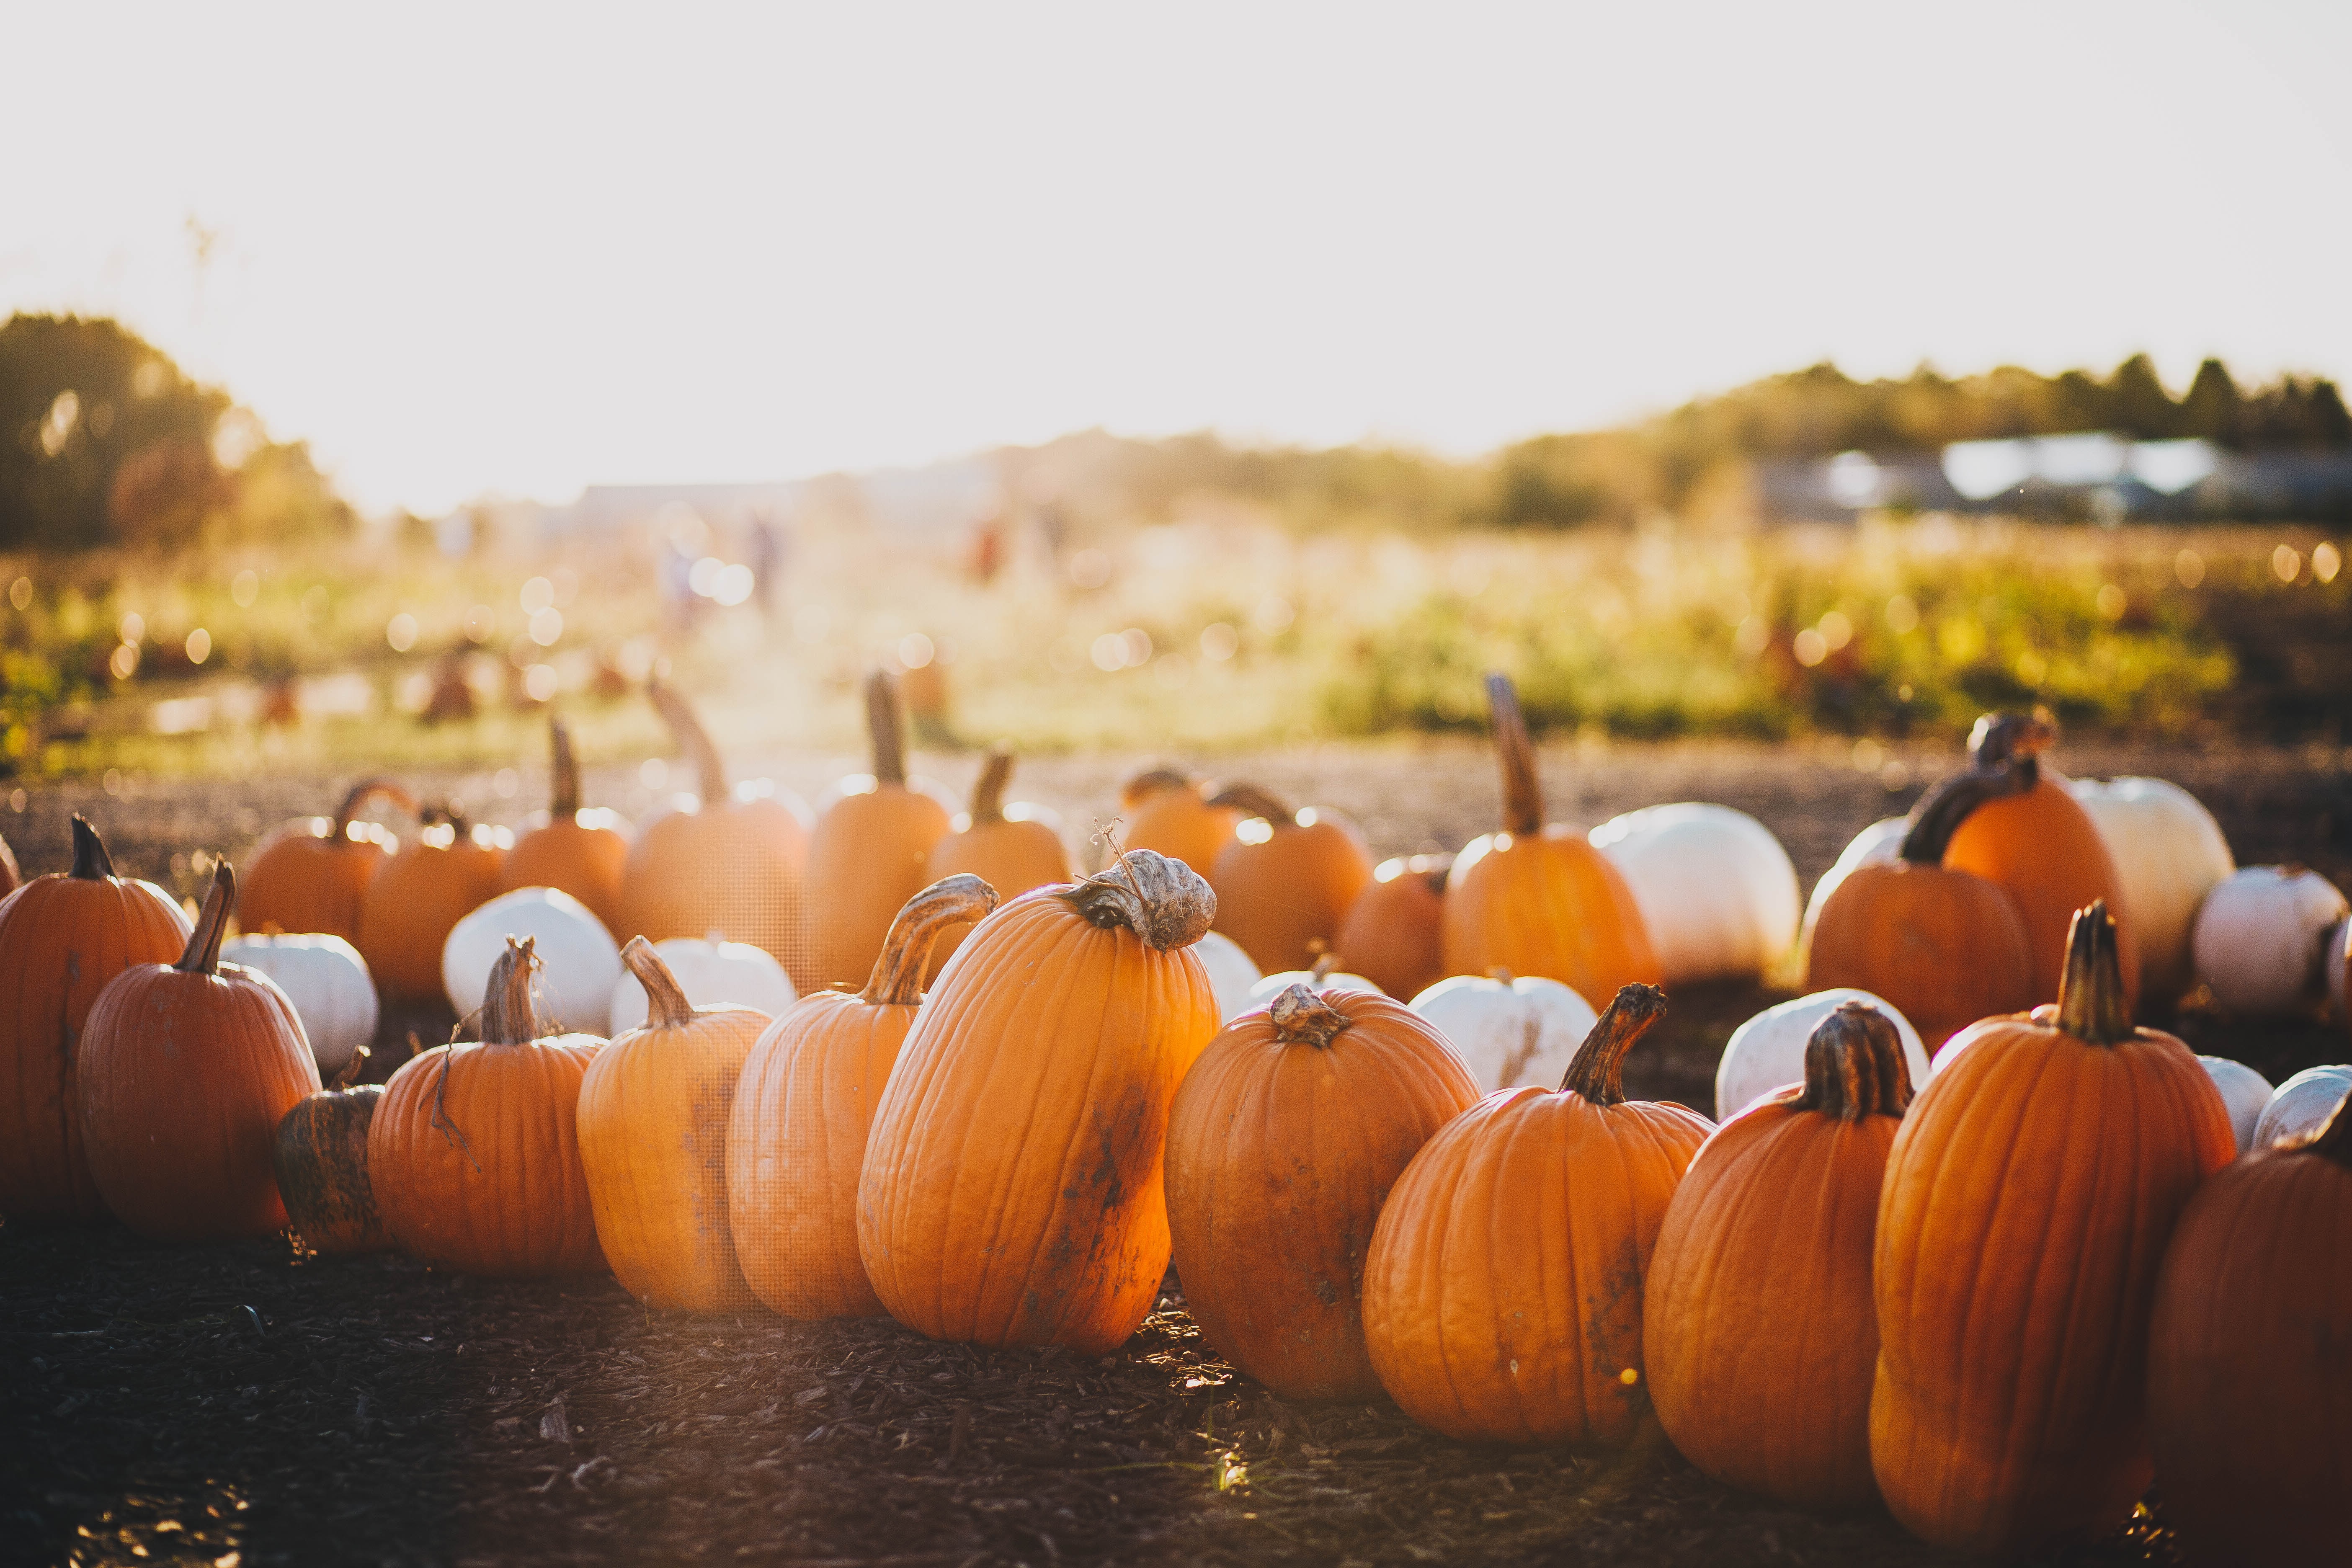 pumpkins lined up in a pumpkin patch. The sun is shining down on them. Going to a pumpkin patch is a fall and Halloween bucket list item.